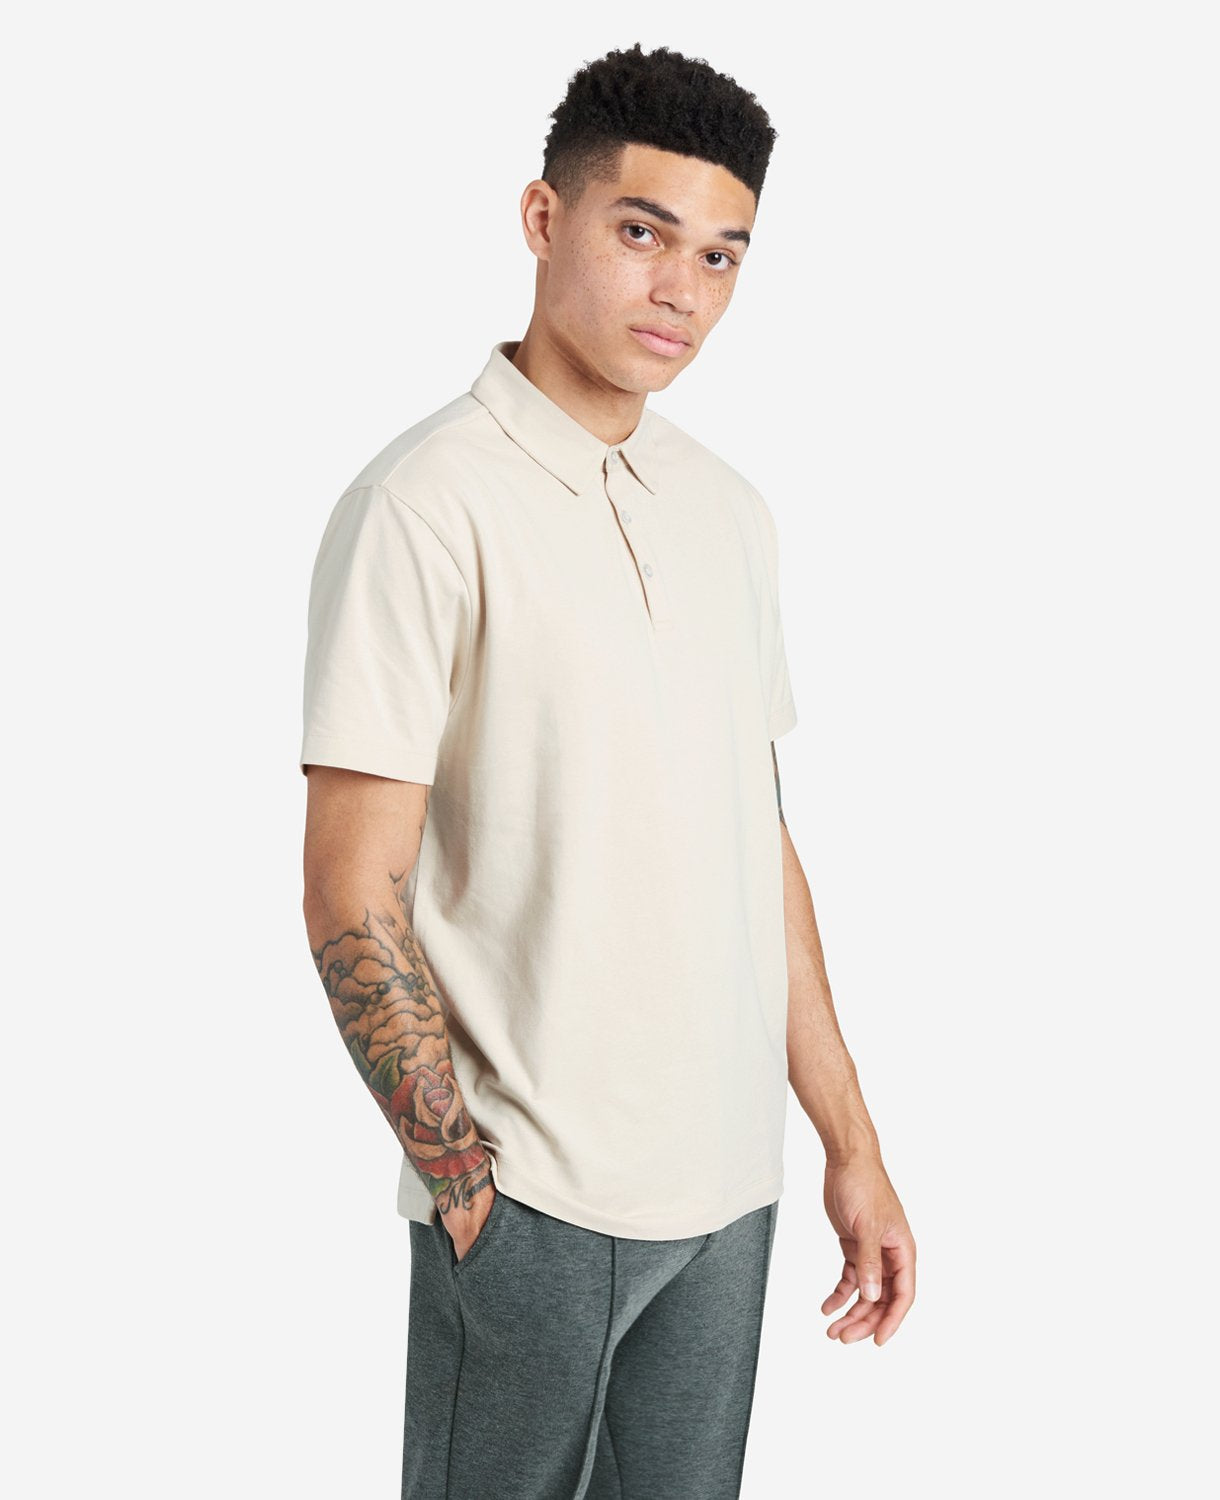 Kenneth Cole | Essential Tailored Polo in OATMEAL, Size: XL